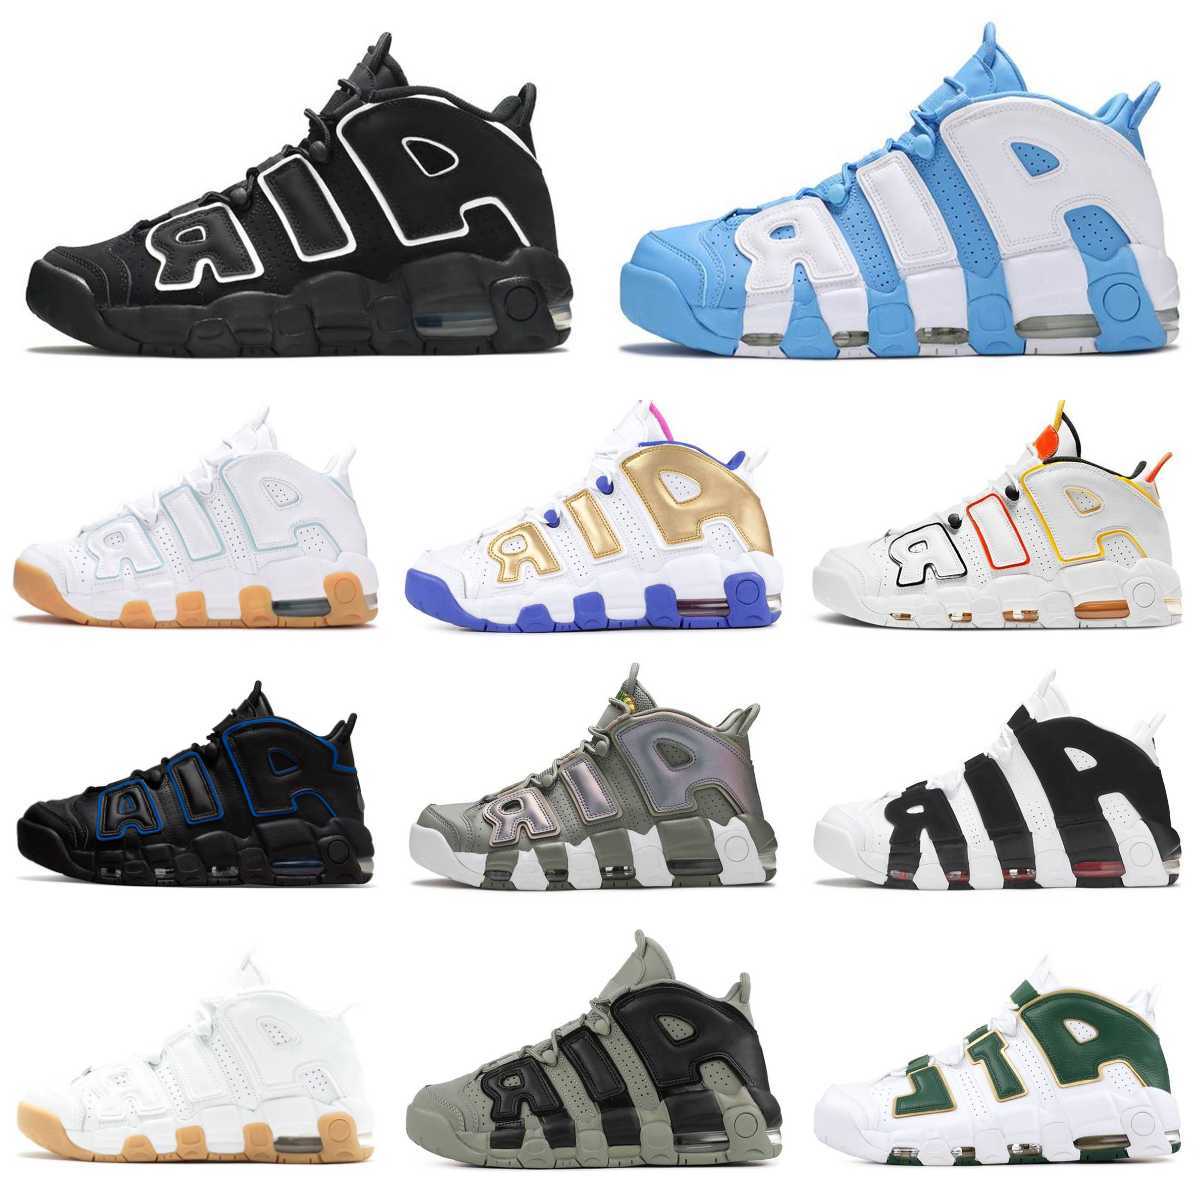 

Trainers Uptempos 96 Basketball Shoes Mens Black Royal Action Grape Light Aqua Blue Air More Outdoor 96S Volt White Tatal Orange Hoops Barley Green Designer Sneakers, Please contact us